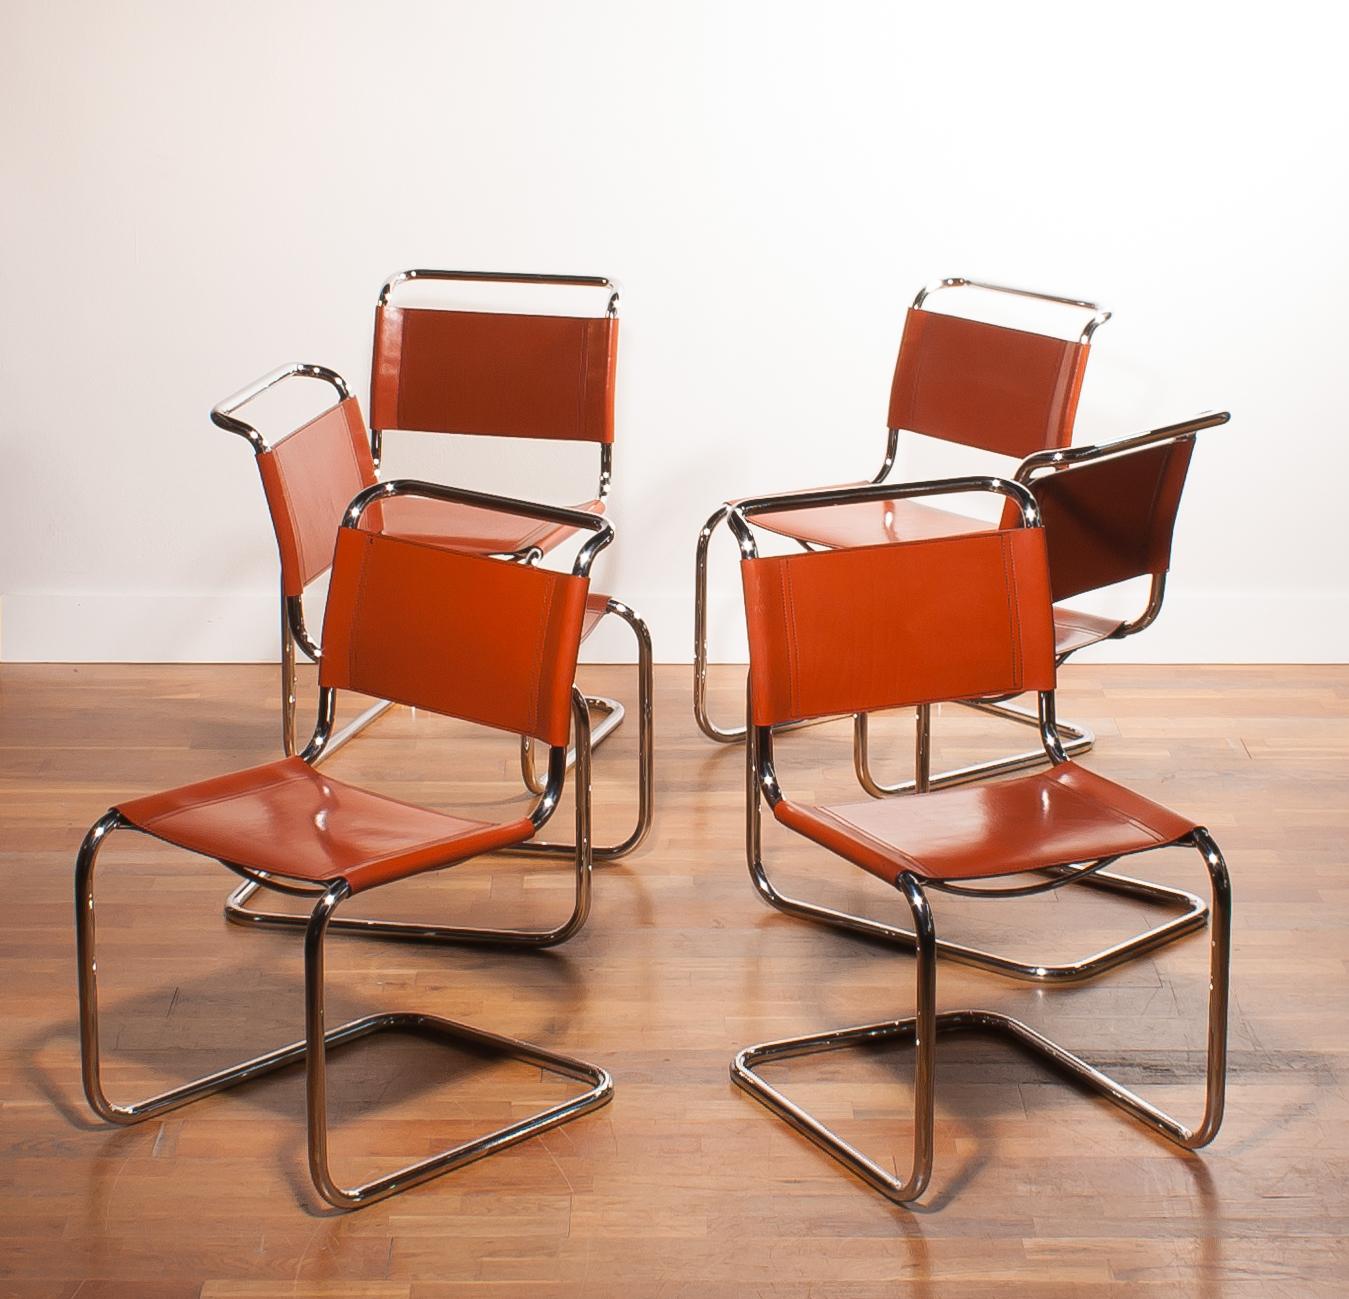 A beautiful set of six dining chairs designed by Mart Stam for Fasem.
These chairs have a cantilevered tubular metal frame with cognac saddle leather seating and backrest.
They are in wonderful condition.
The chairs are marked with 'Fasem